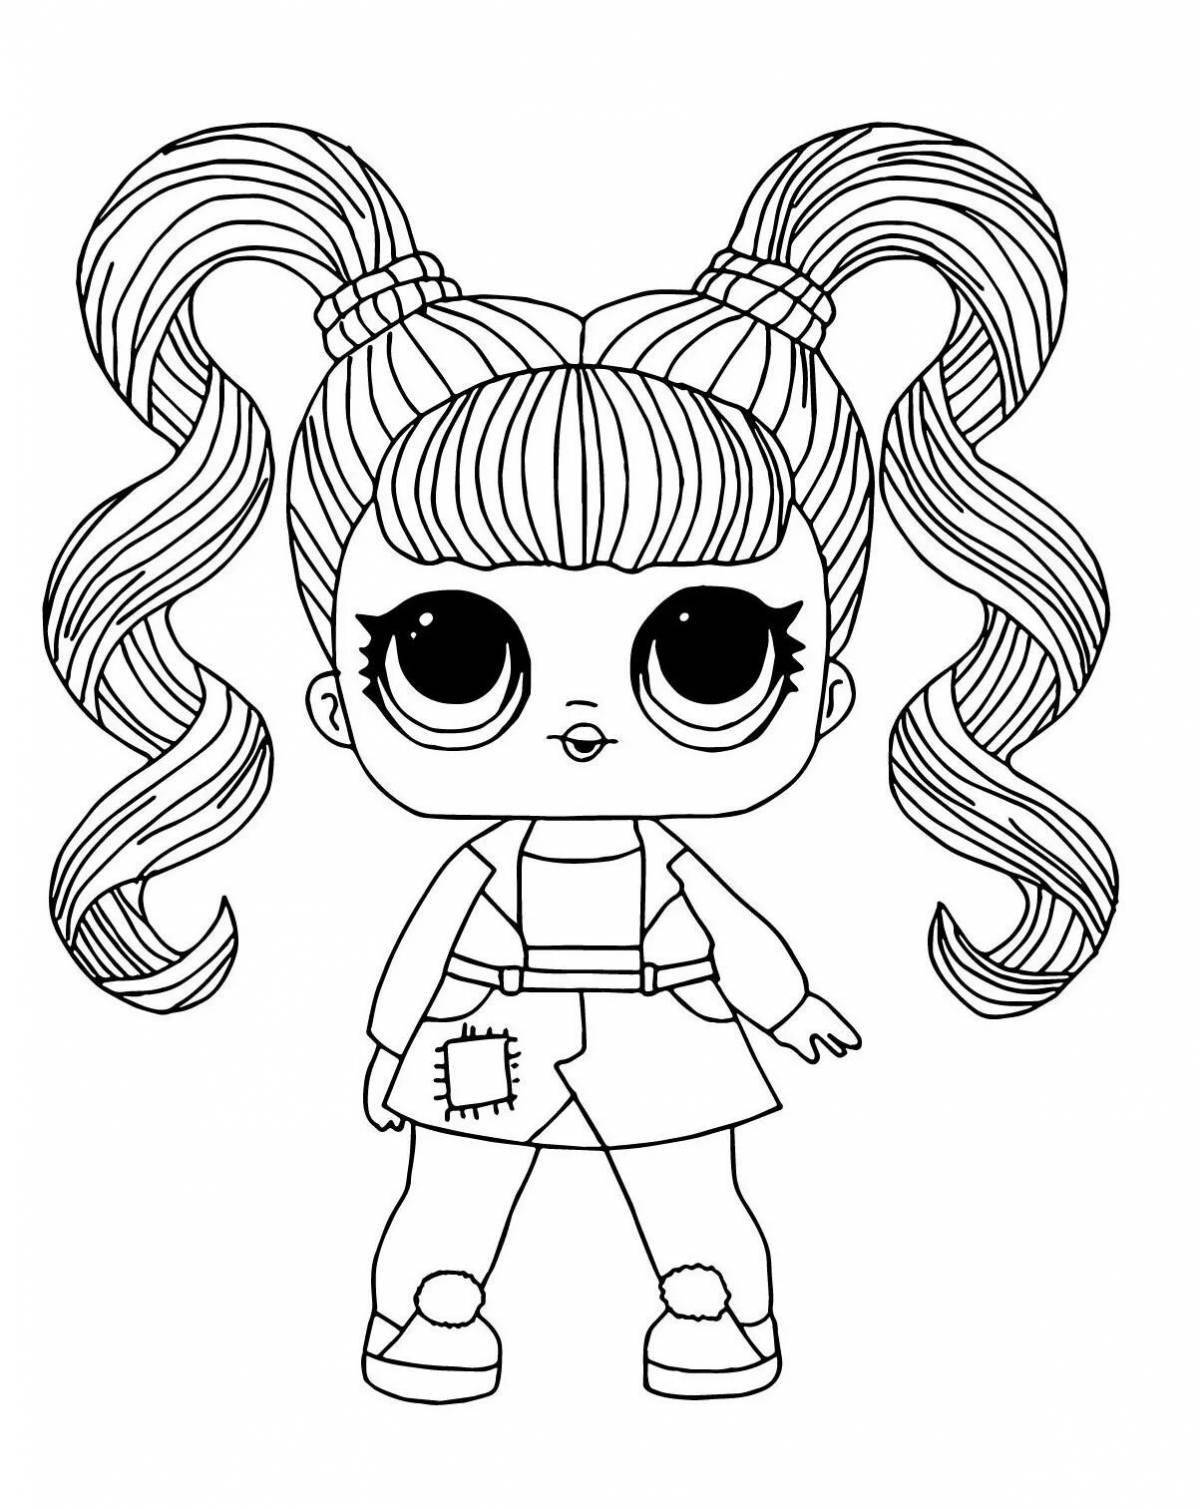 Colorful lol doll coloring printout